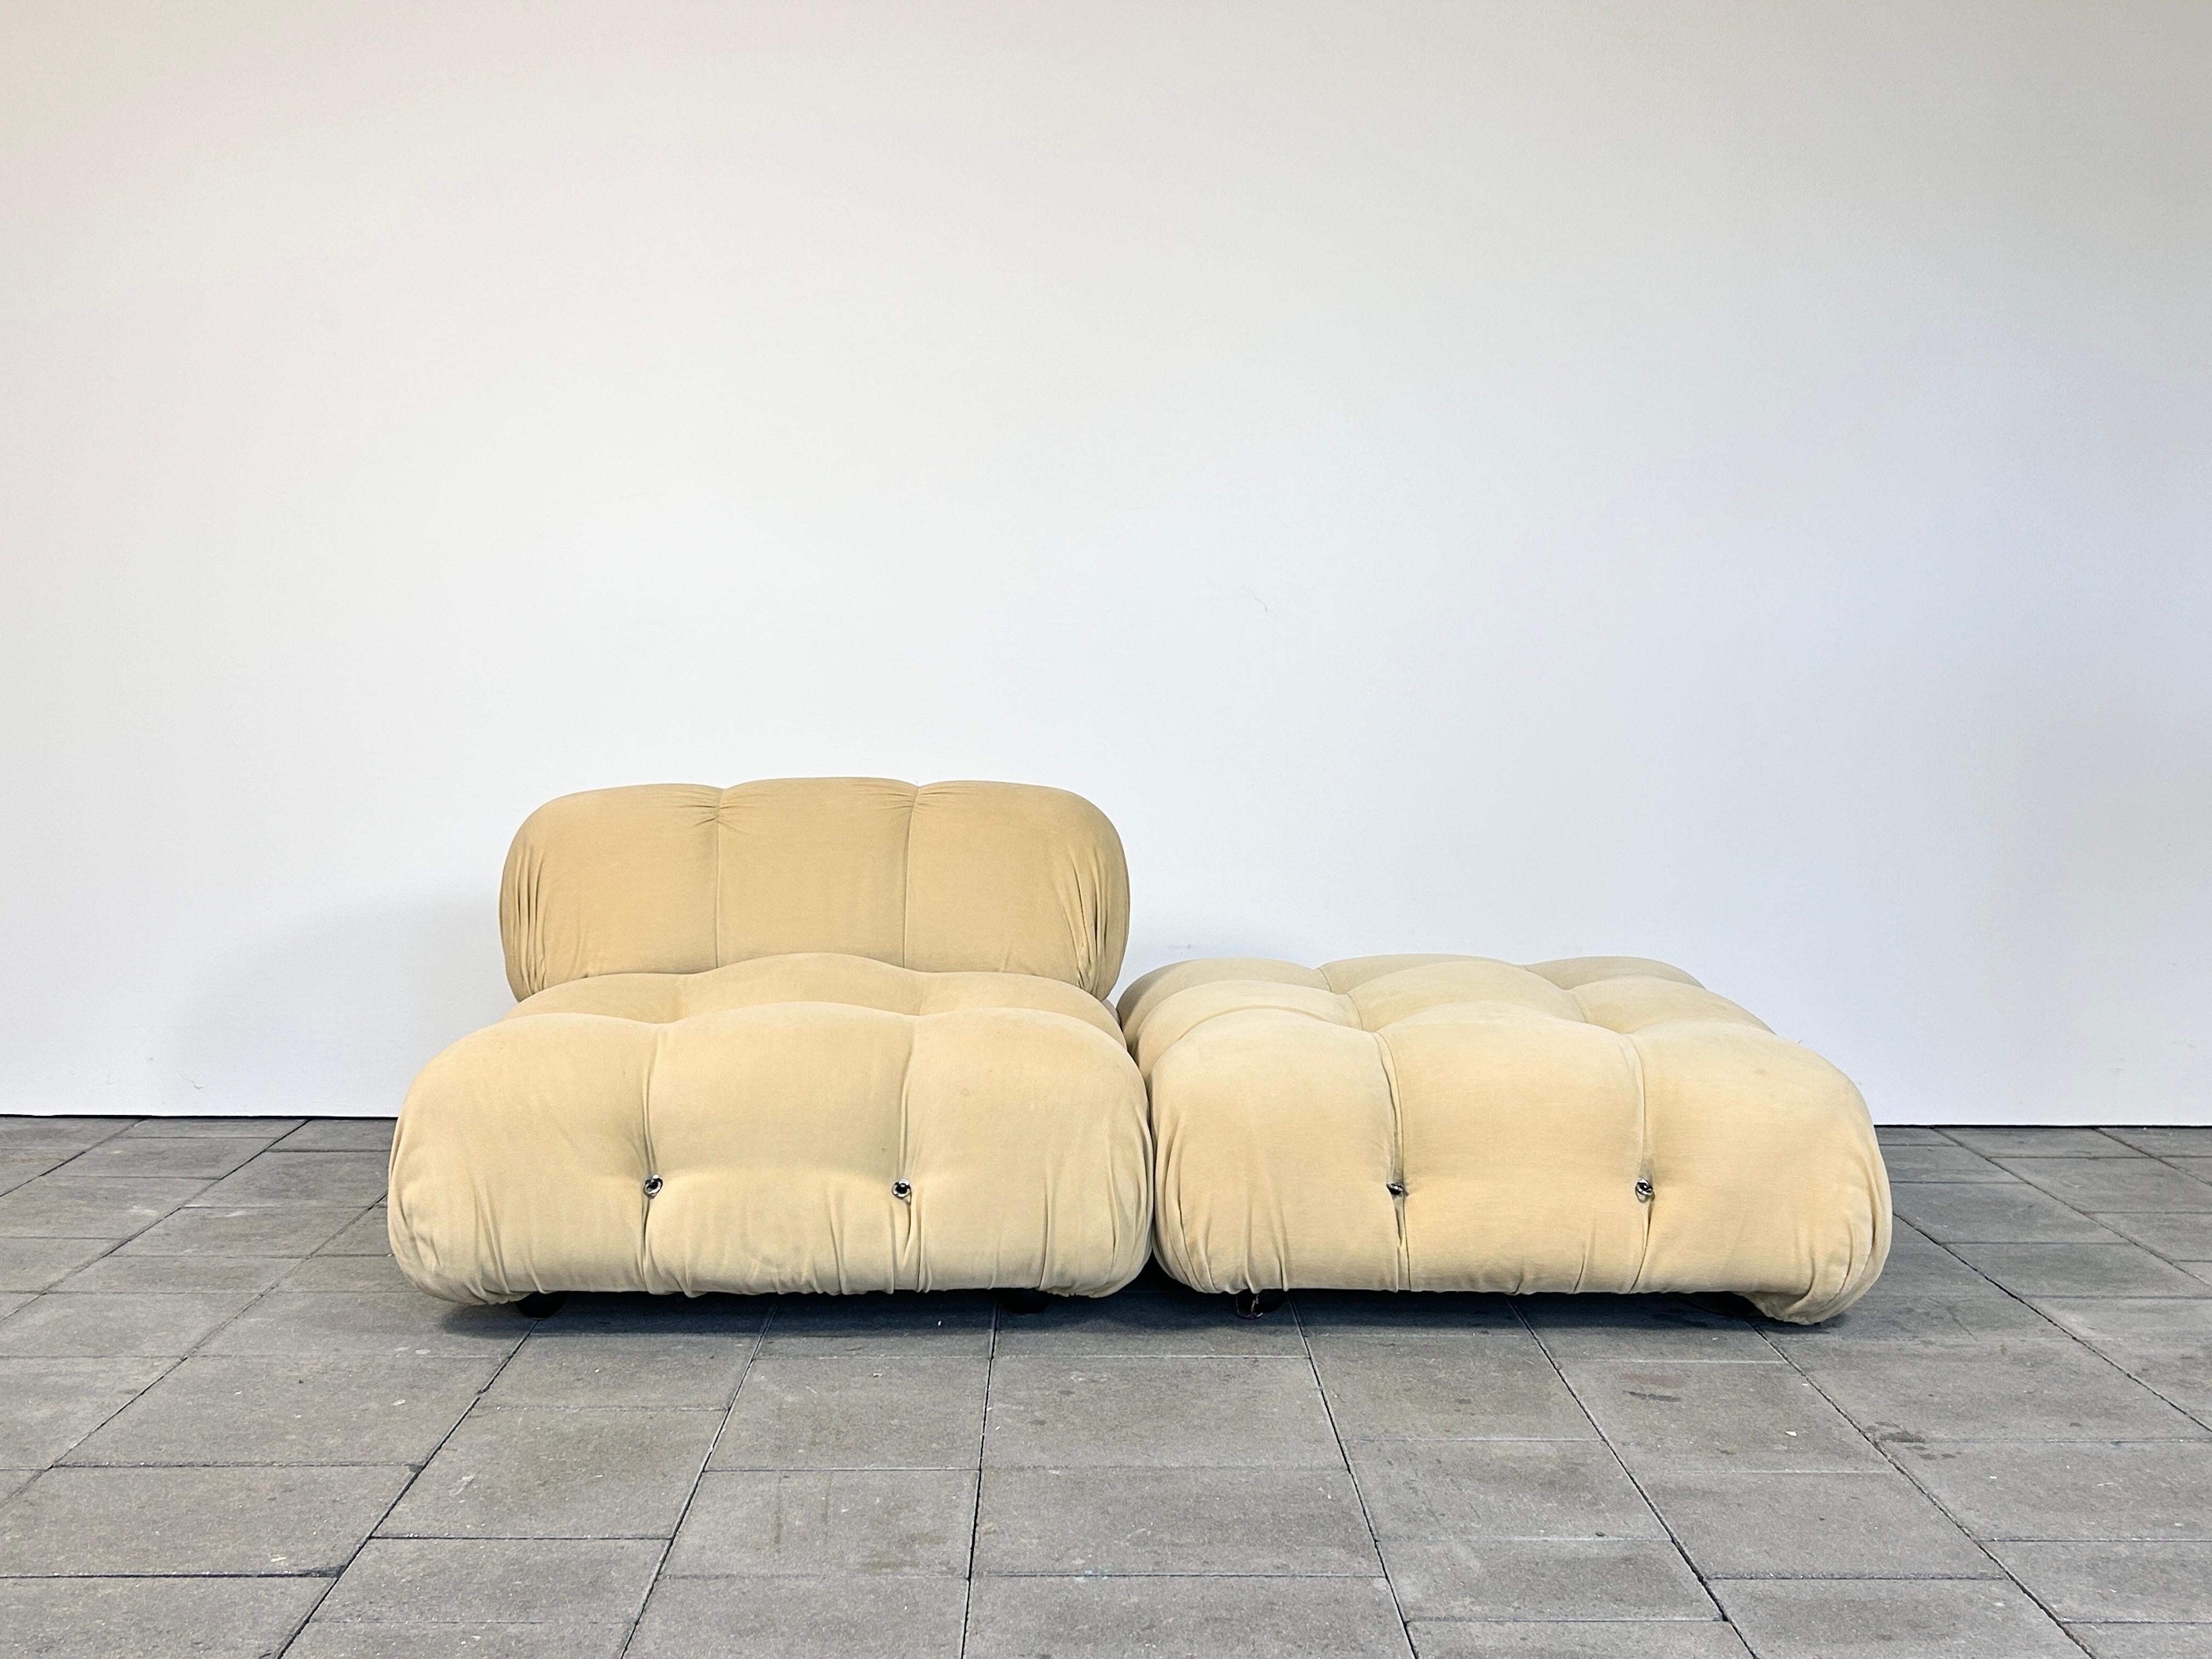 Two Camaleonda seats and one backrest  designed by Mario Bellini for B&B Italia in 1970. 

The offer includes two seats and one backrest (=three parts) for the Camaleonda sofa. They could be used as a lounge chair or to extend your existing